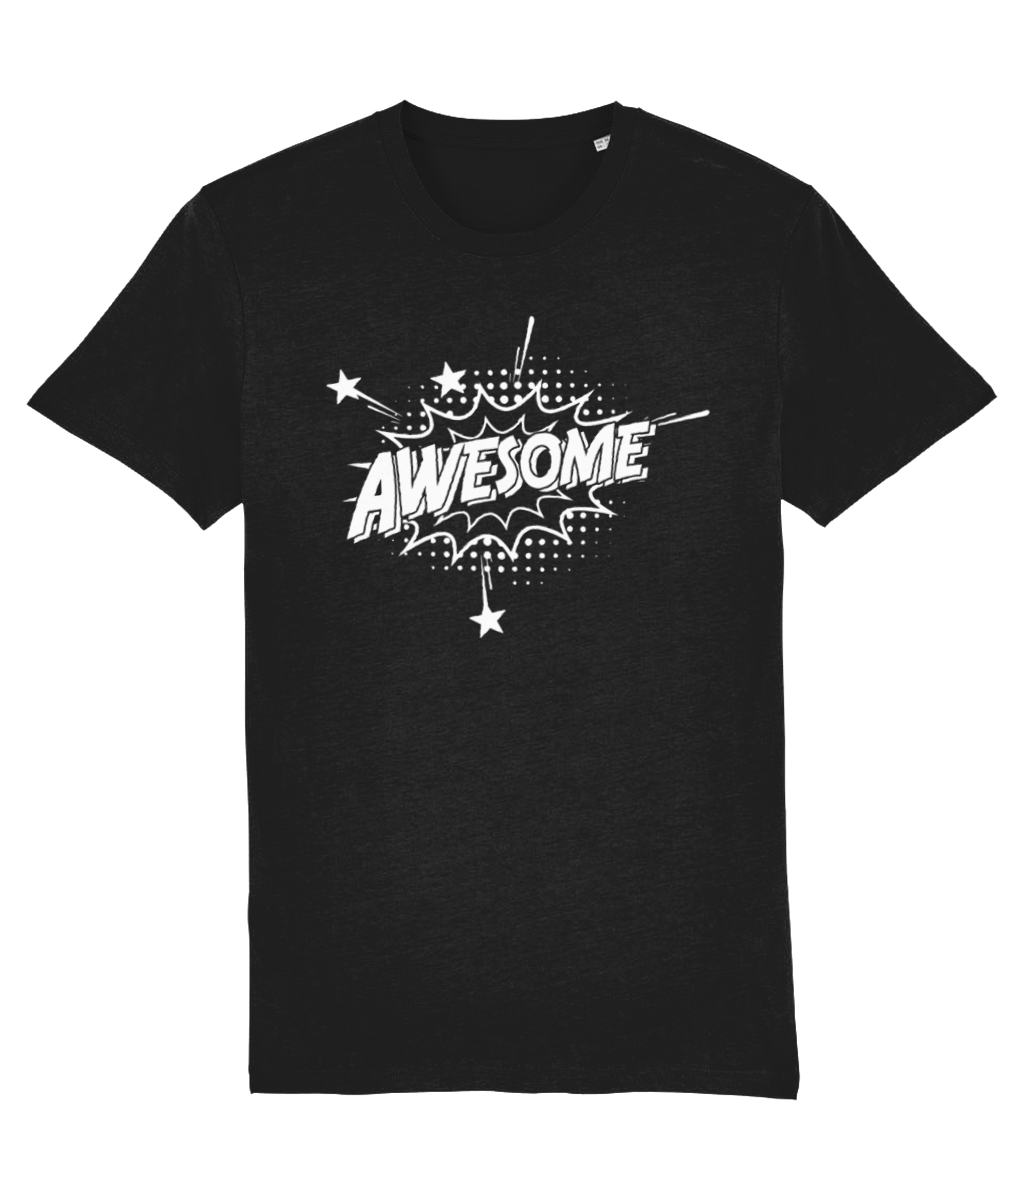 Awesome Adult T-shirt